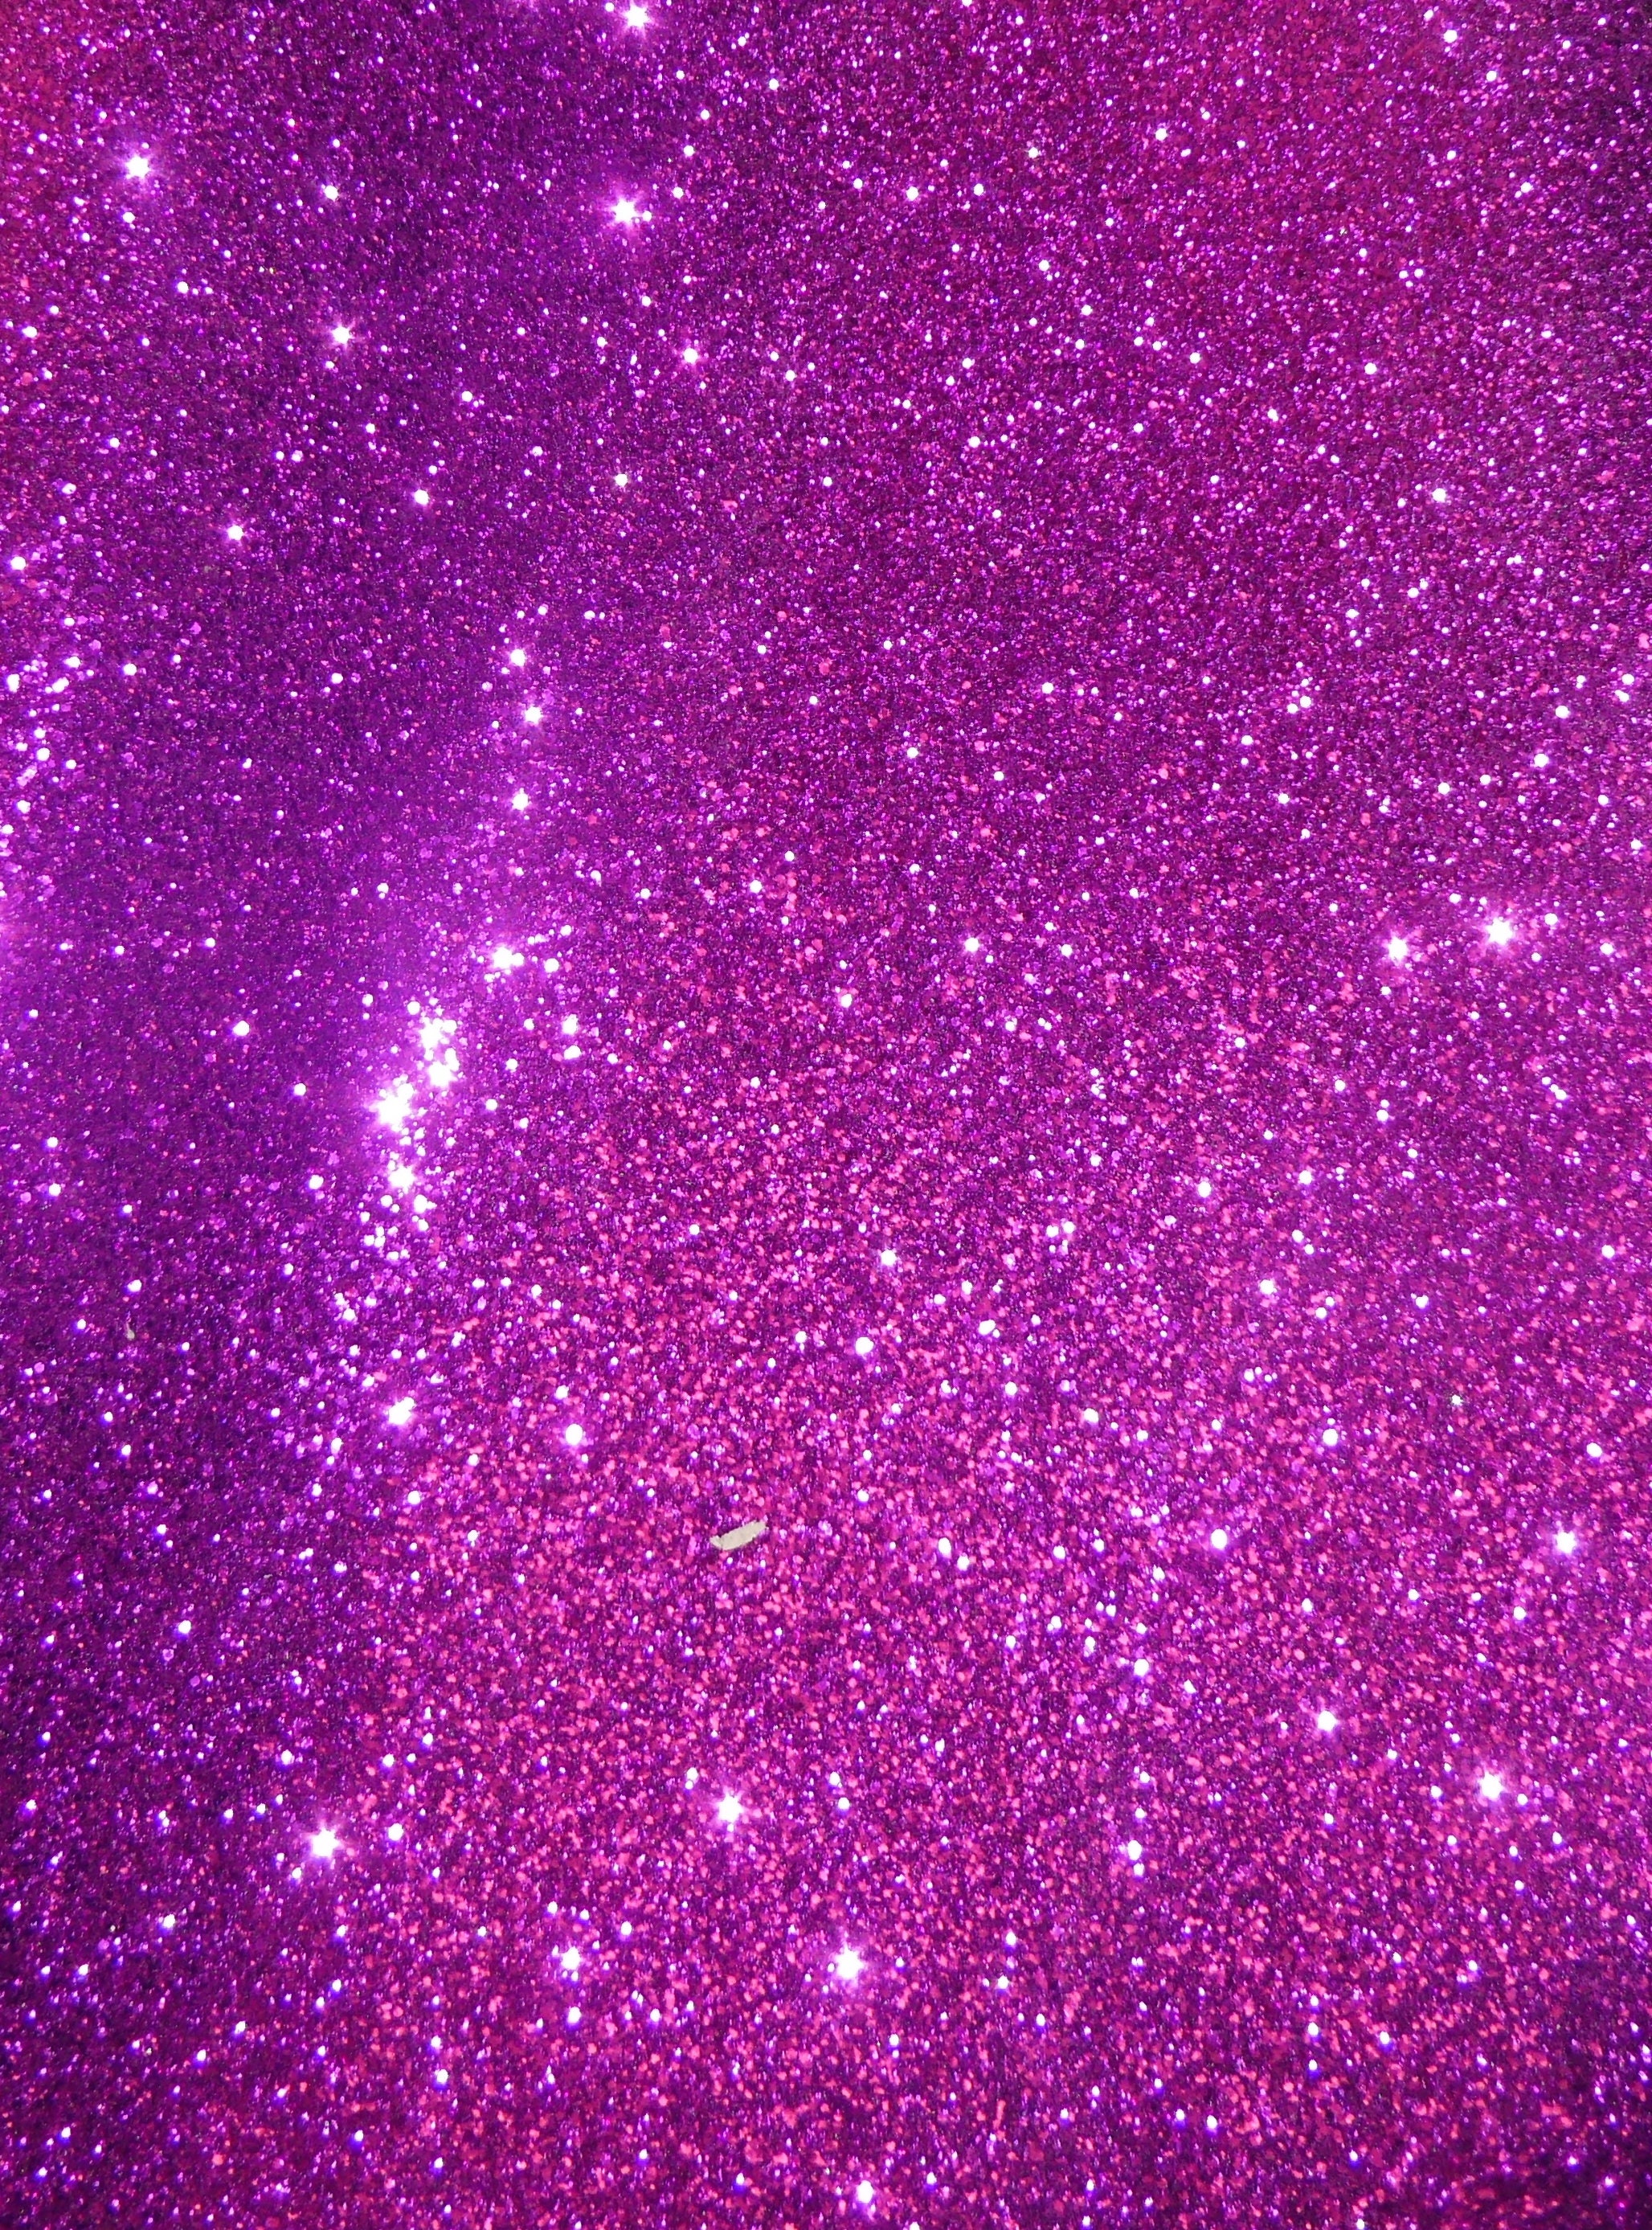 Chunky Glitter 8x10 FUCHSIA Dark Pink Fabric applied to Leather for ...